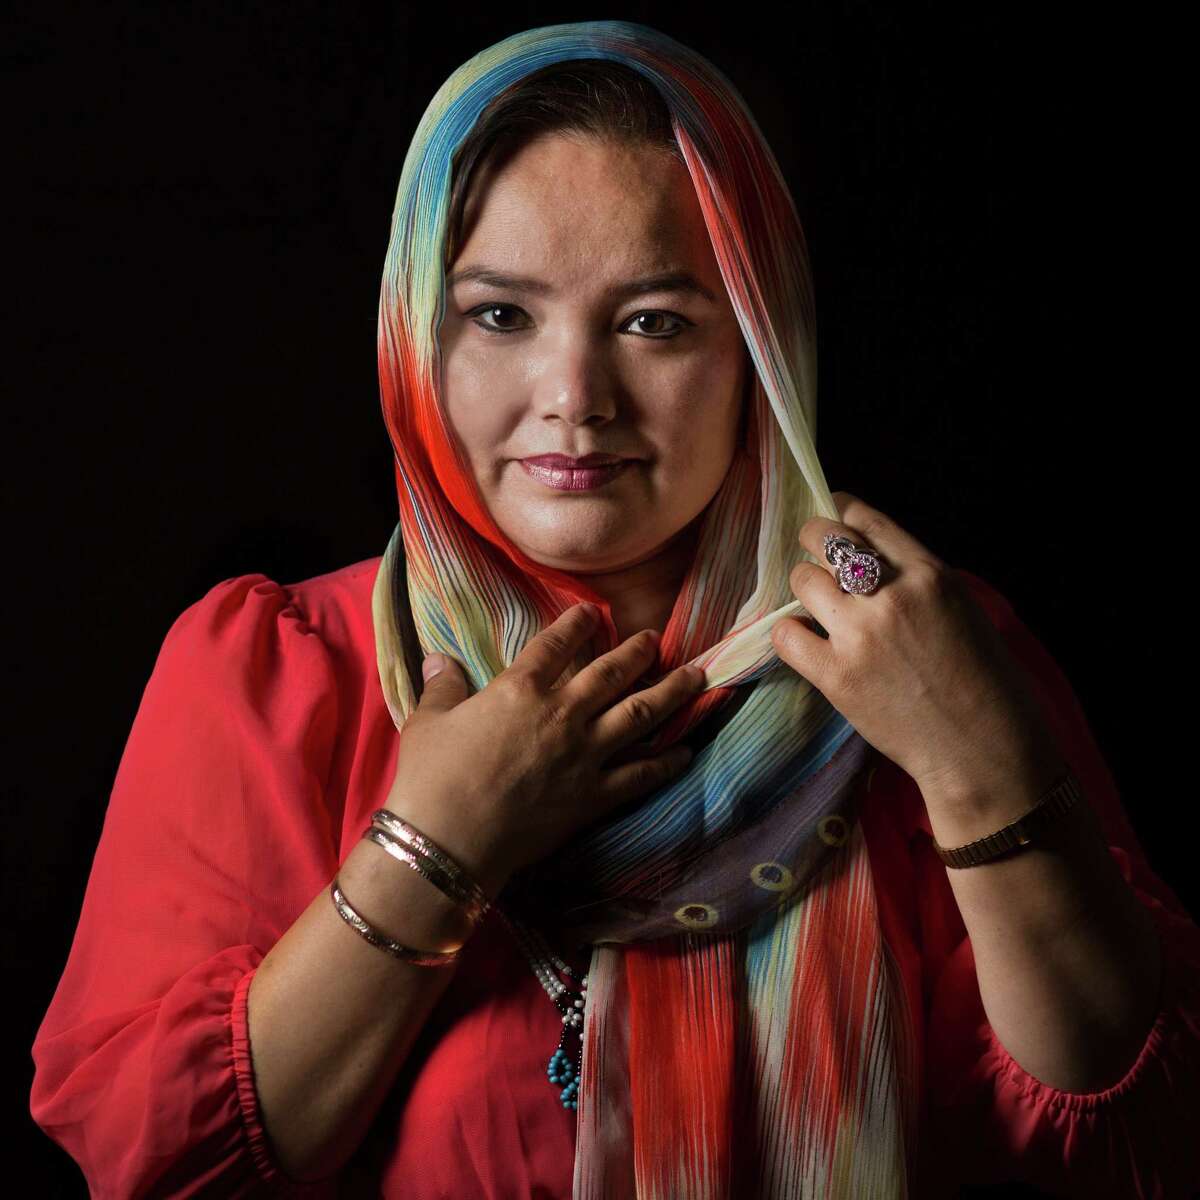 Khatera Khorushan, 38, a refugee from Afghanistan made sure to bring her diplomas and degrees when she moved to the United States. Saturday, Sept. 12, 2015, in Houston.